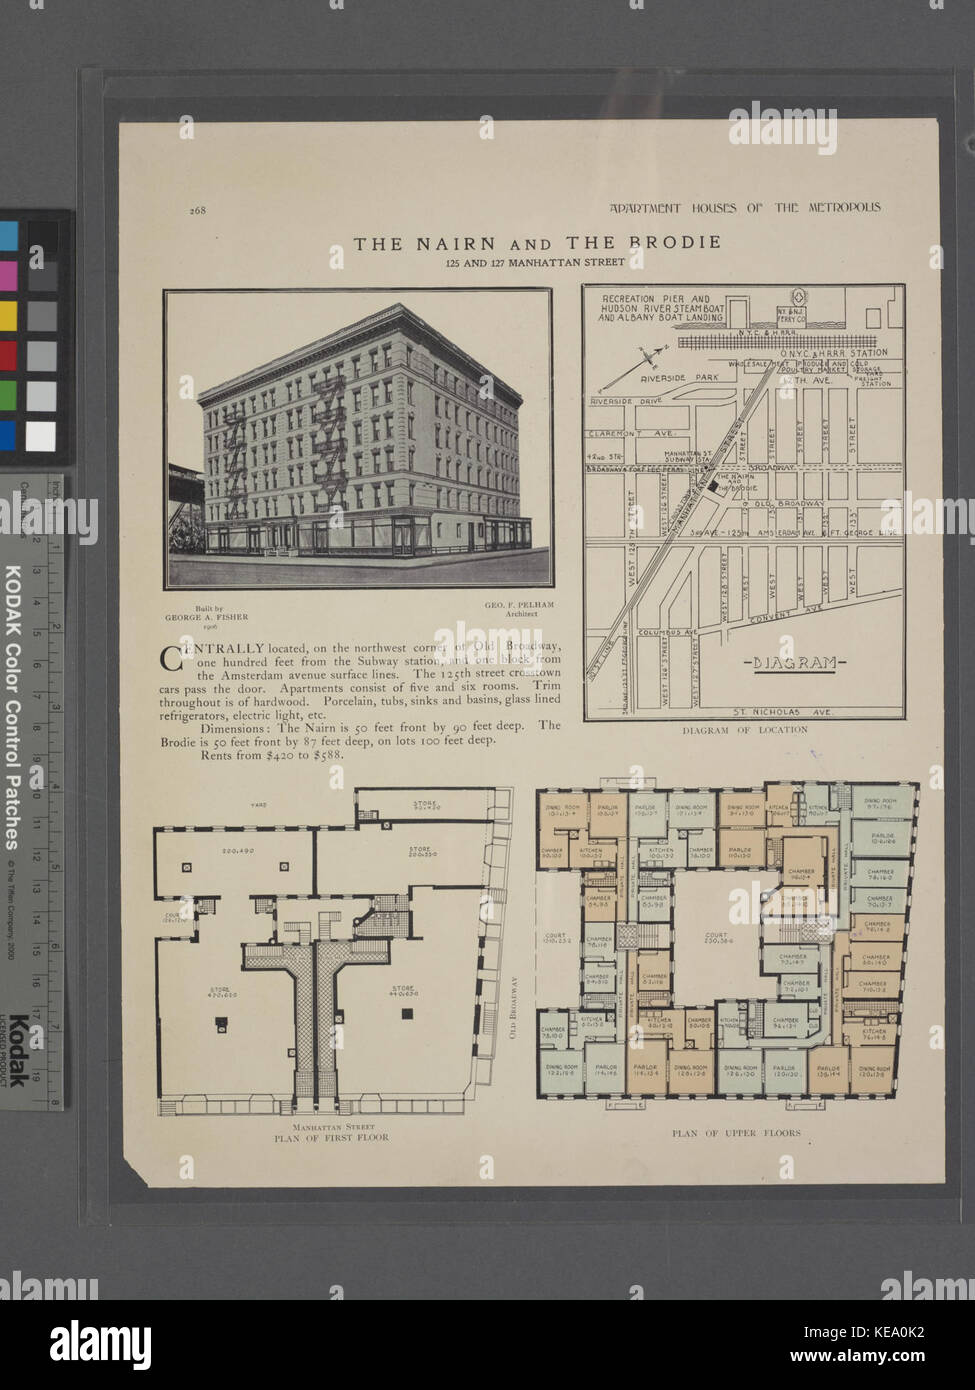 The Nairn and the Brodie, 125 and 127 Manhattan Street; Diagram of location; Plan of first floor; Plan of upper floors (NYPL b12647274 465692) Stock Photo